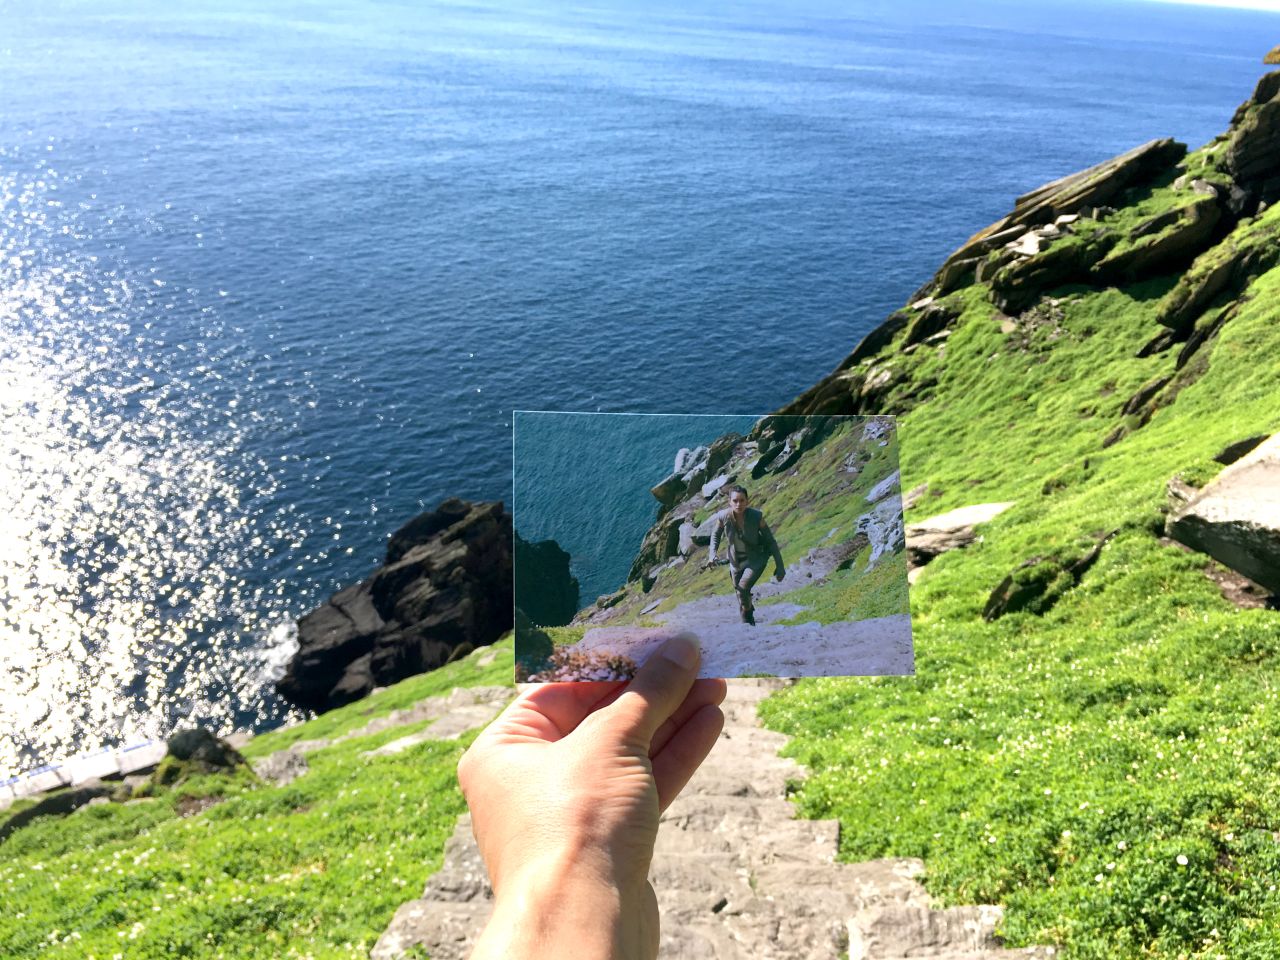 <strong>Movie magic:</strong> Film fan Andrea David travels the world looking for locations used in her favorite movies and TV series. Once there, David takes fantastic photographs, matching up the film still with the real-life location. <em>Pictured here: Skellig Michael, Ireland --"Star Wars: The Last Jedi."</em>